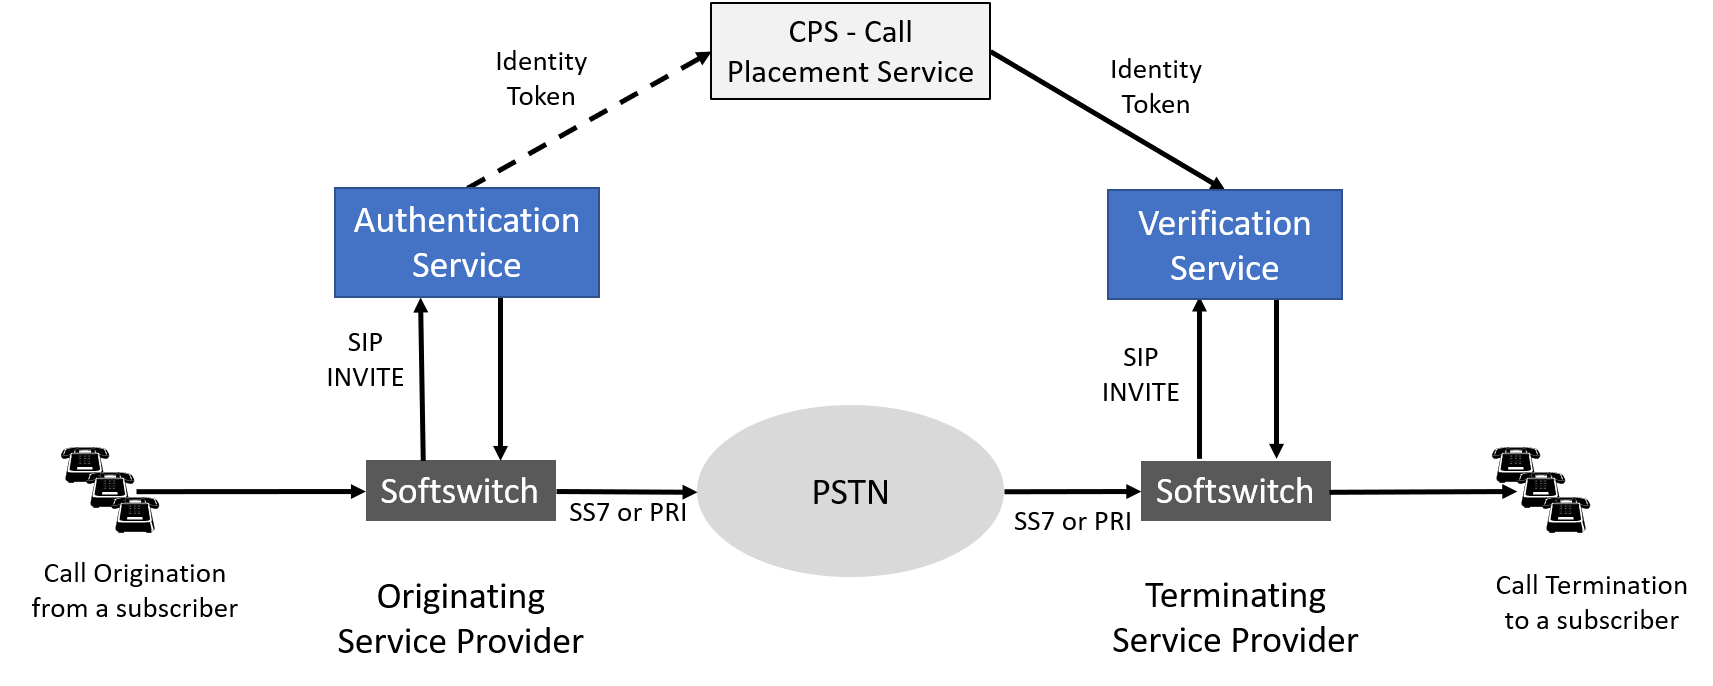 Out-of-Band STIR Call Flow